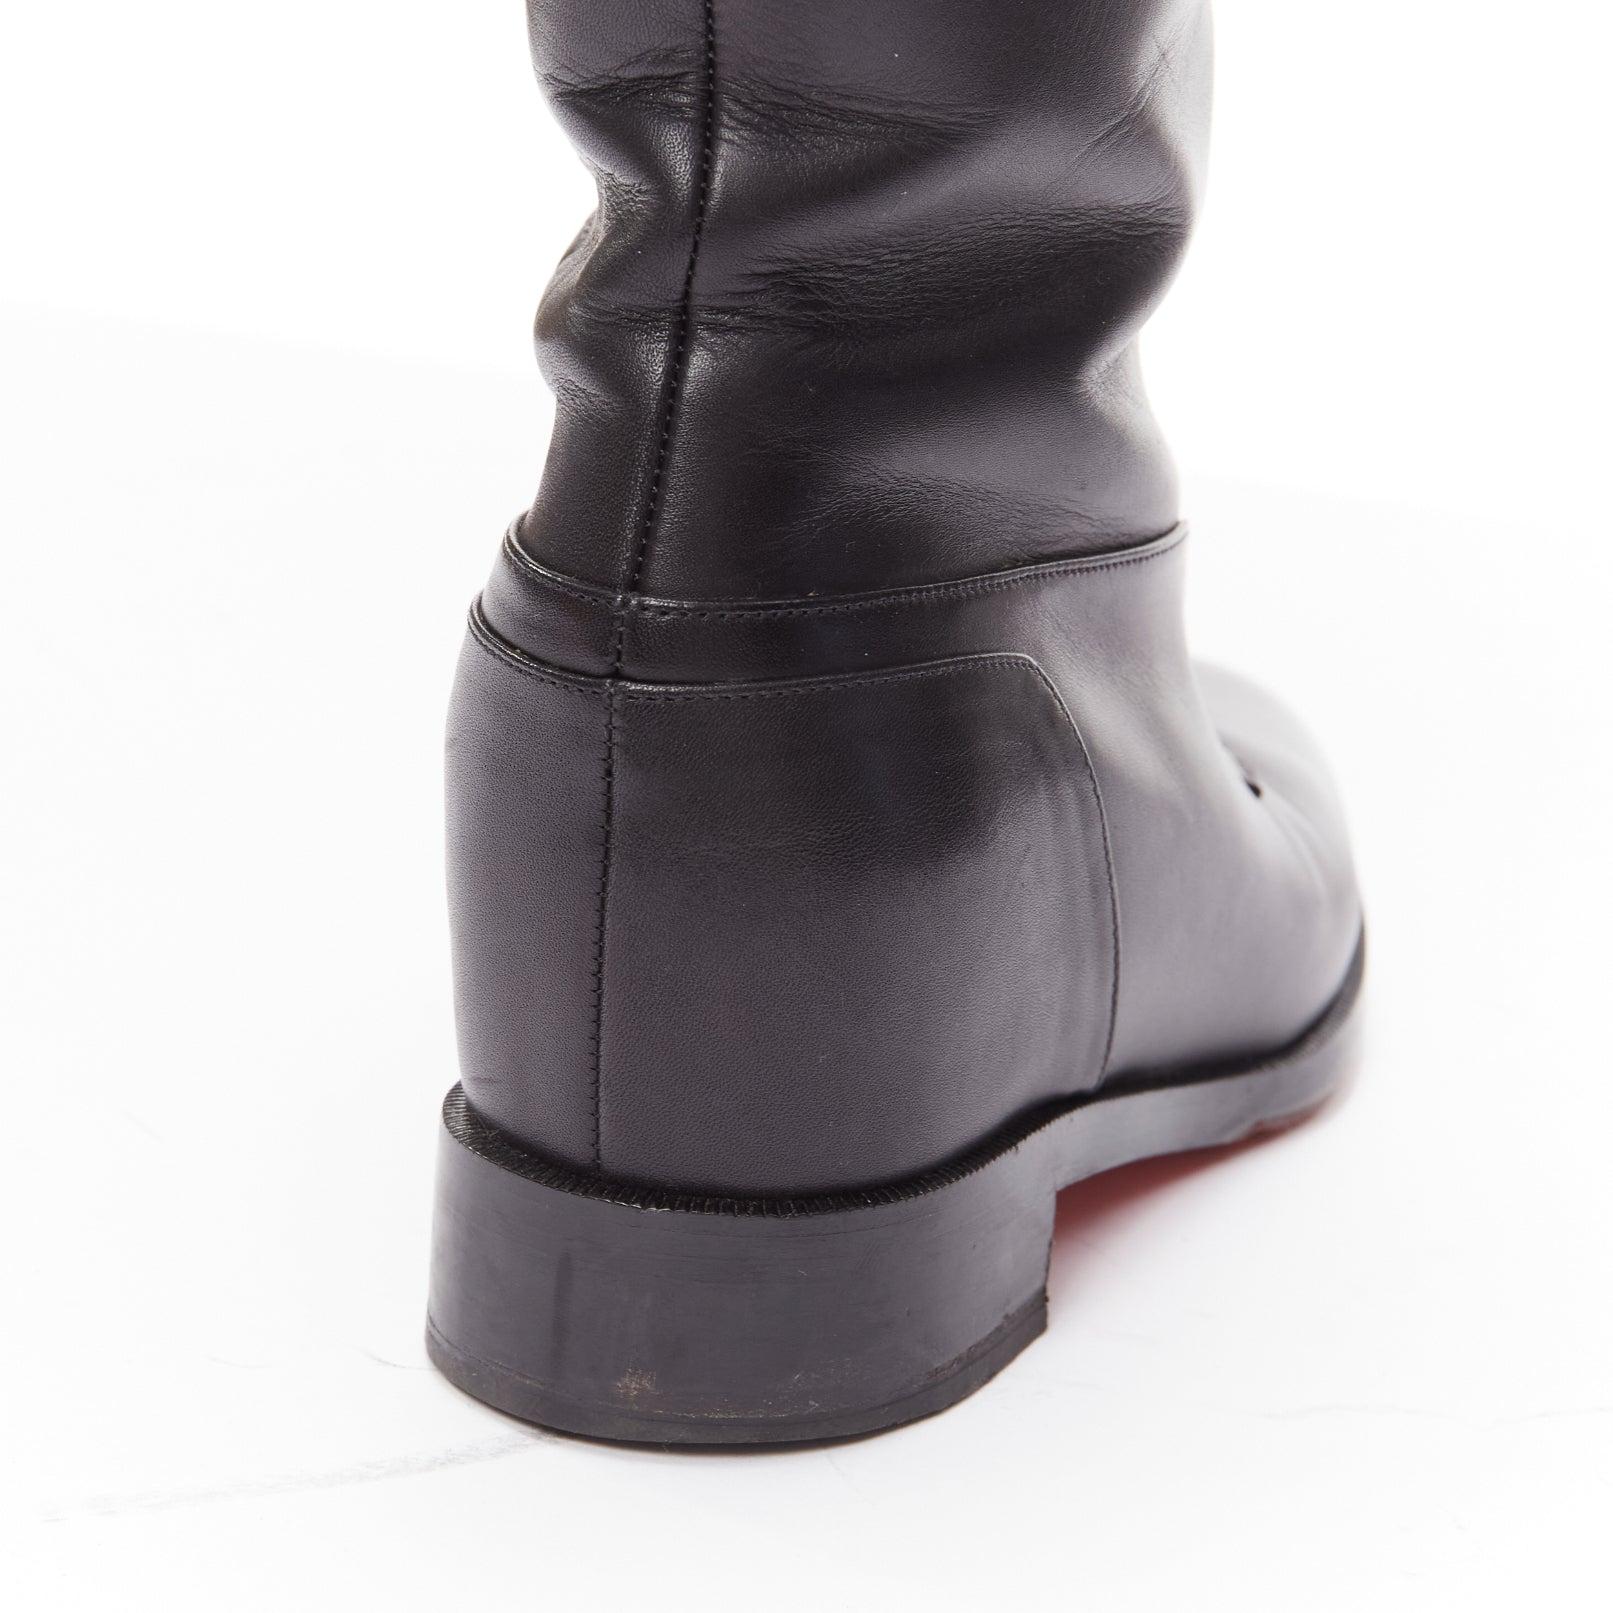 CHRISTIAN LOUBOUTIN black leather zip front concealed wedge riding boot EU40 For Sale 4